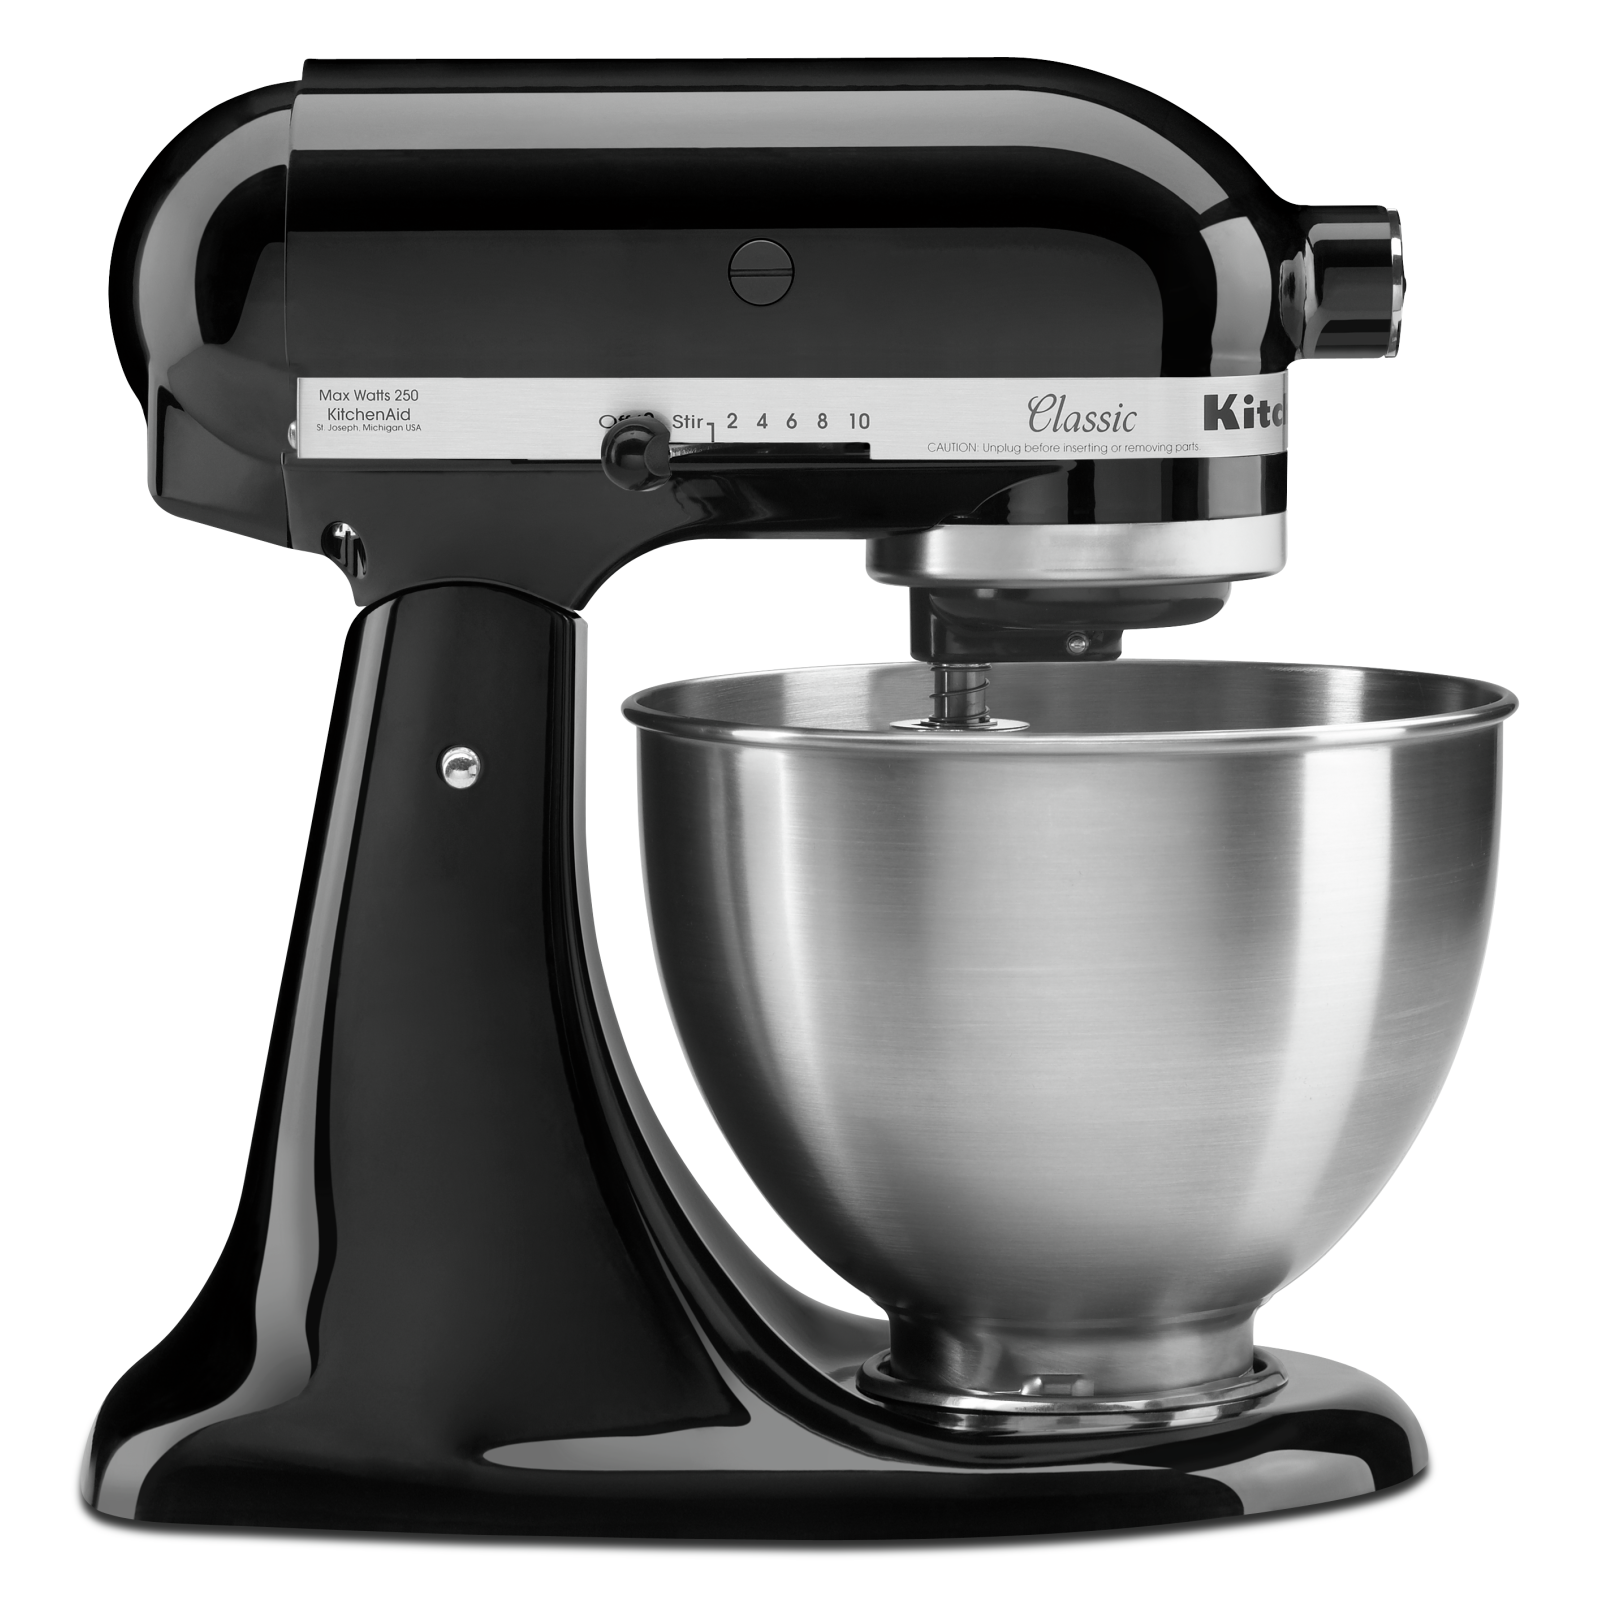 KitchenAid KN1PS Pouring Shield Fits 4.5 or 5 Quart Artisan Tilt Stand Mixers